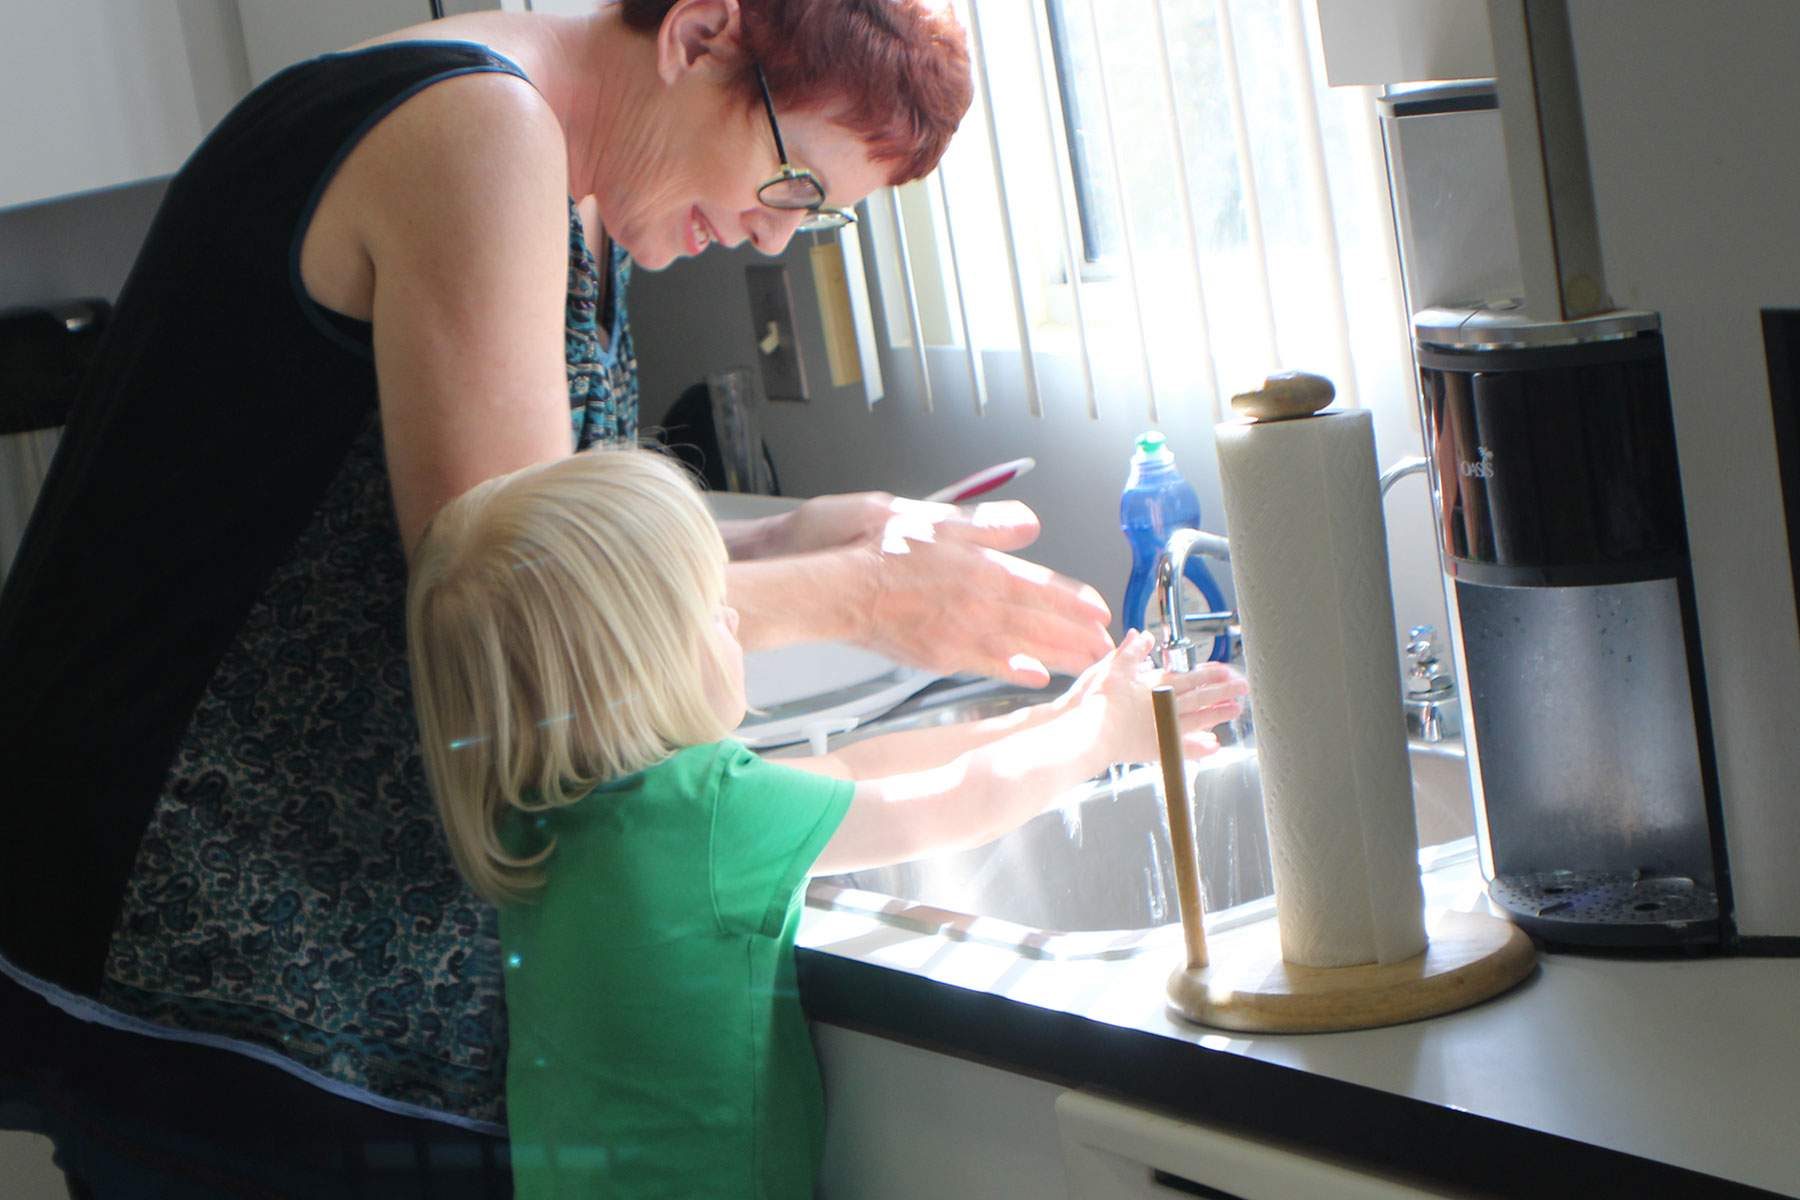 an image of a volunteer helping to teach a school age child how to navigate and find objects around a kitchen sink